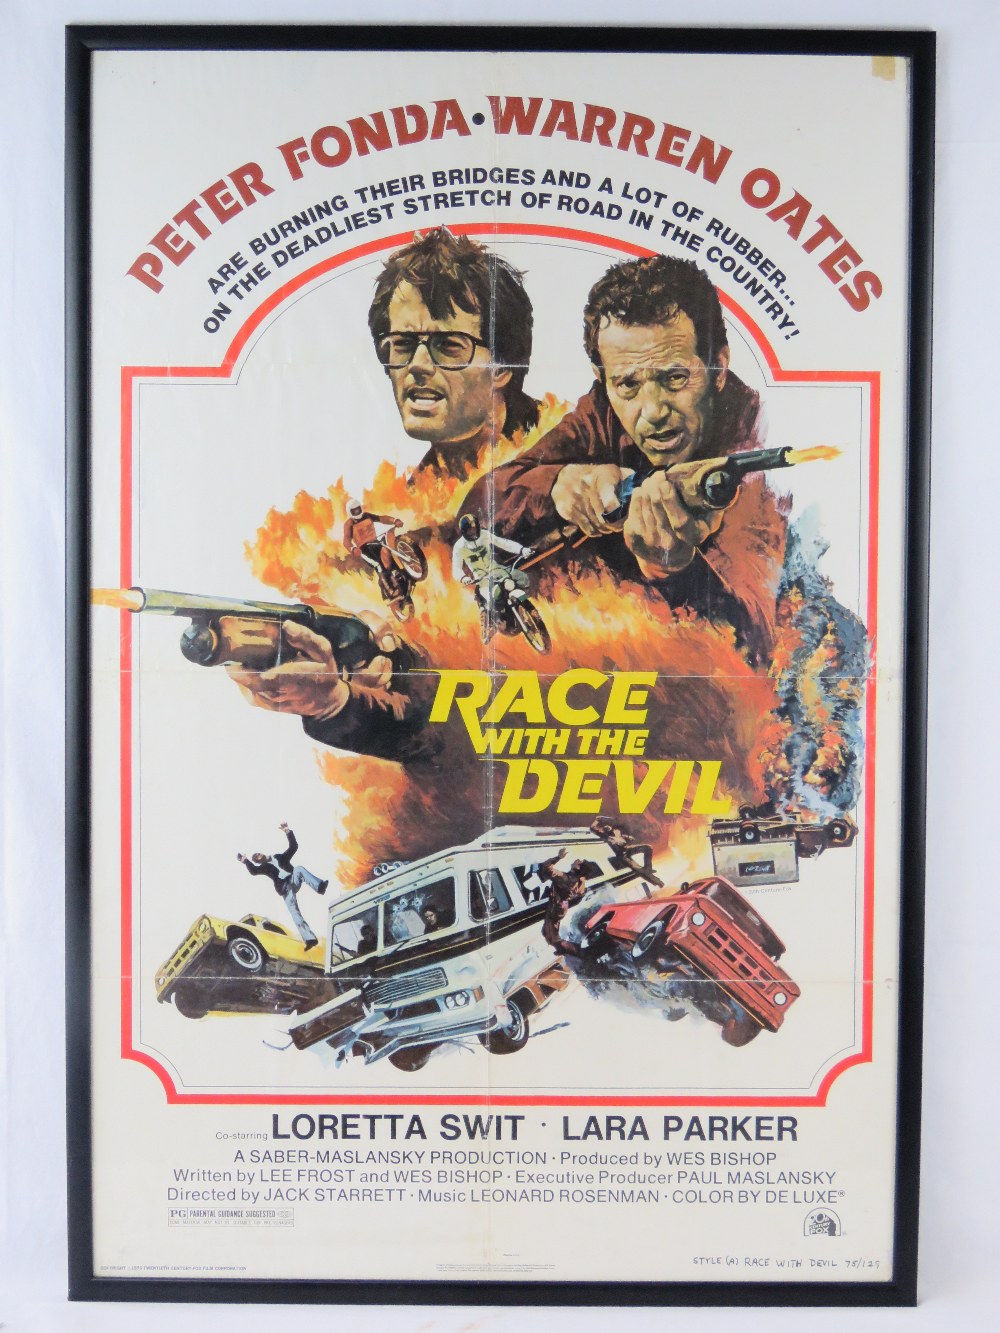 An original 1975 movie poster for the fi